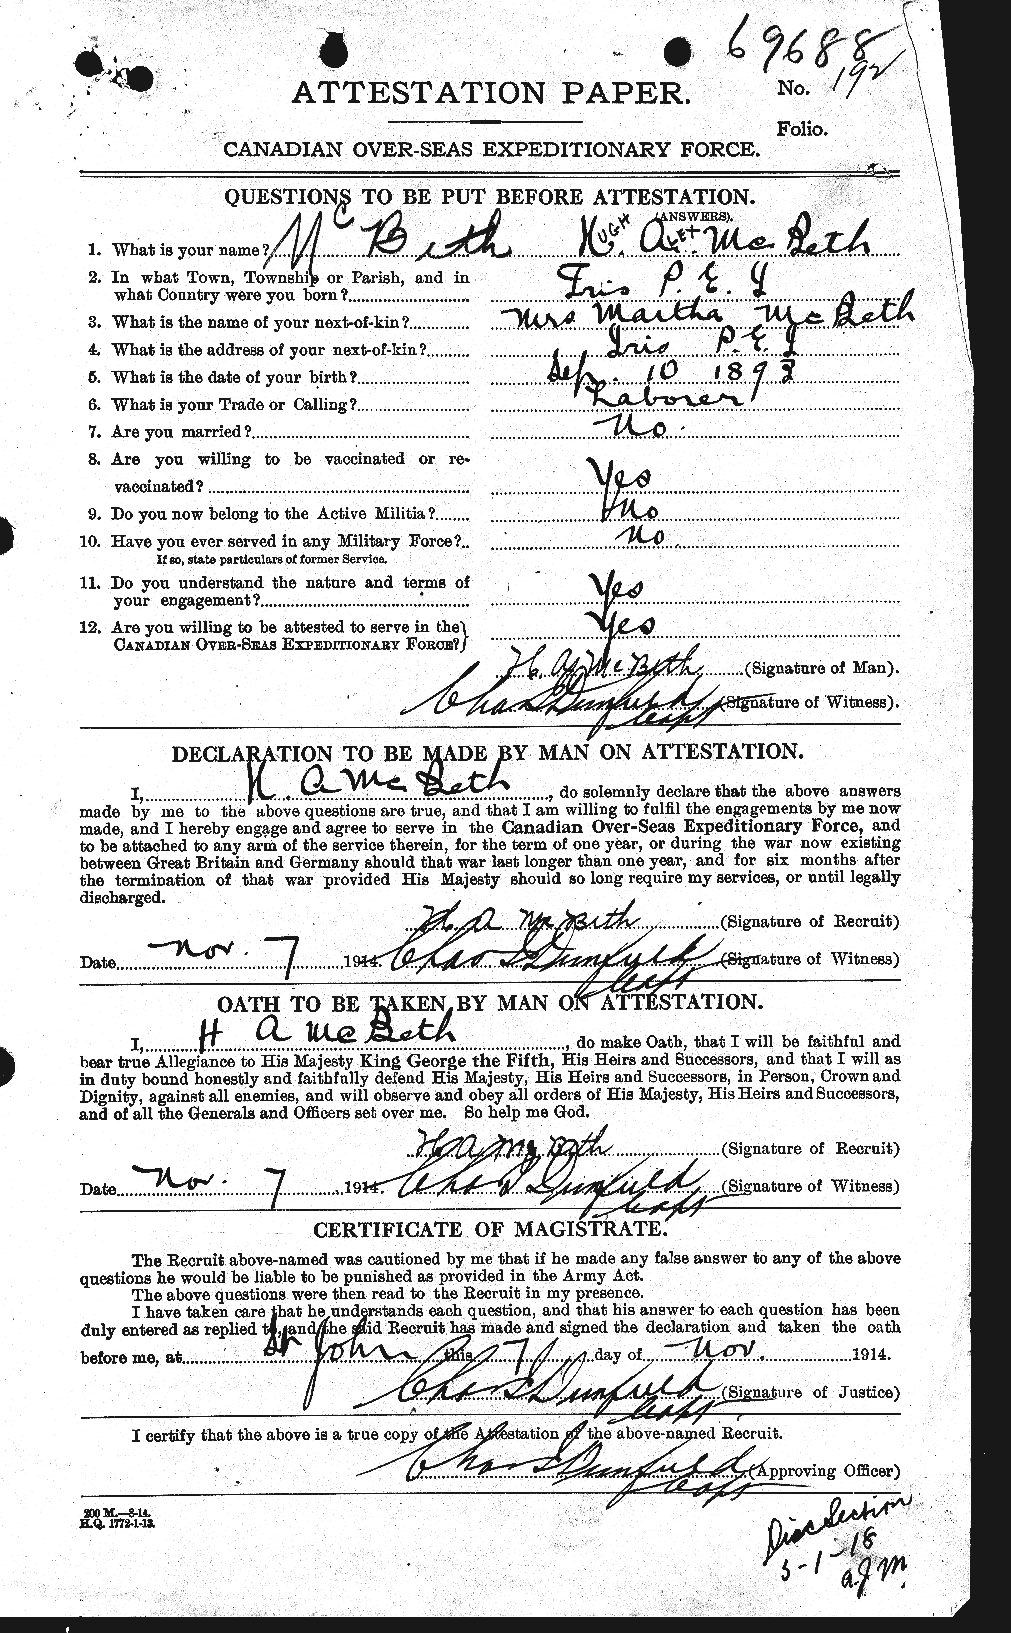 Personnel Records of the First World War - CEF 132119a